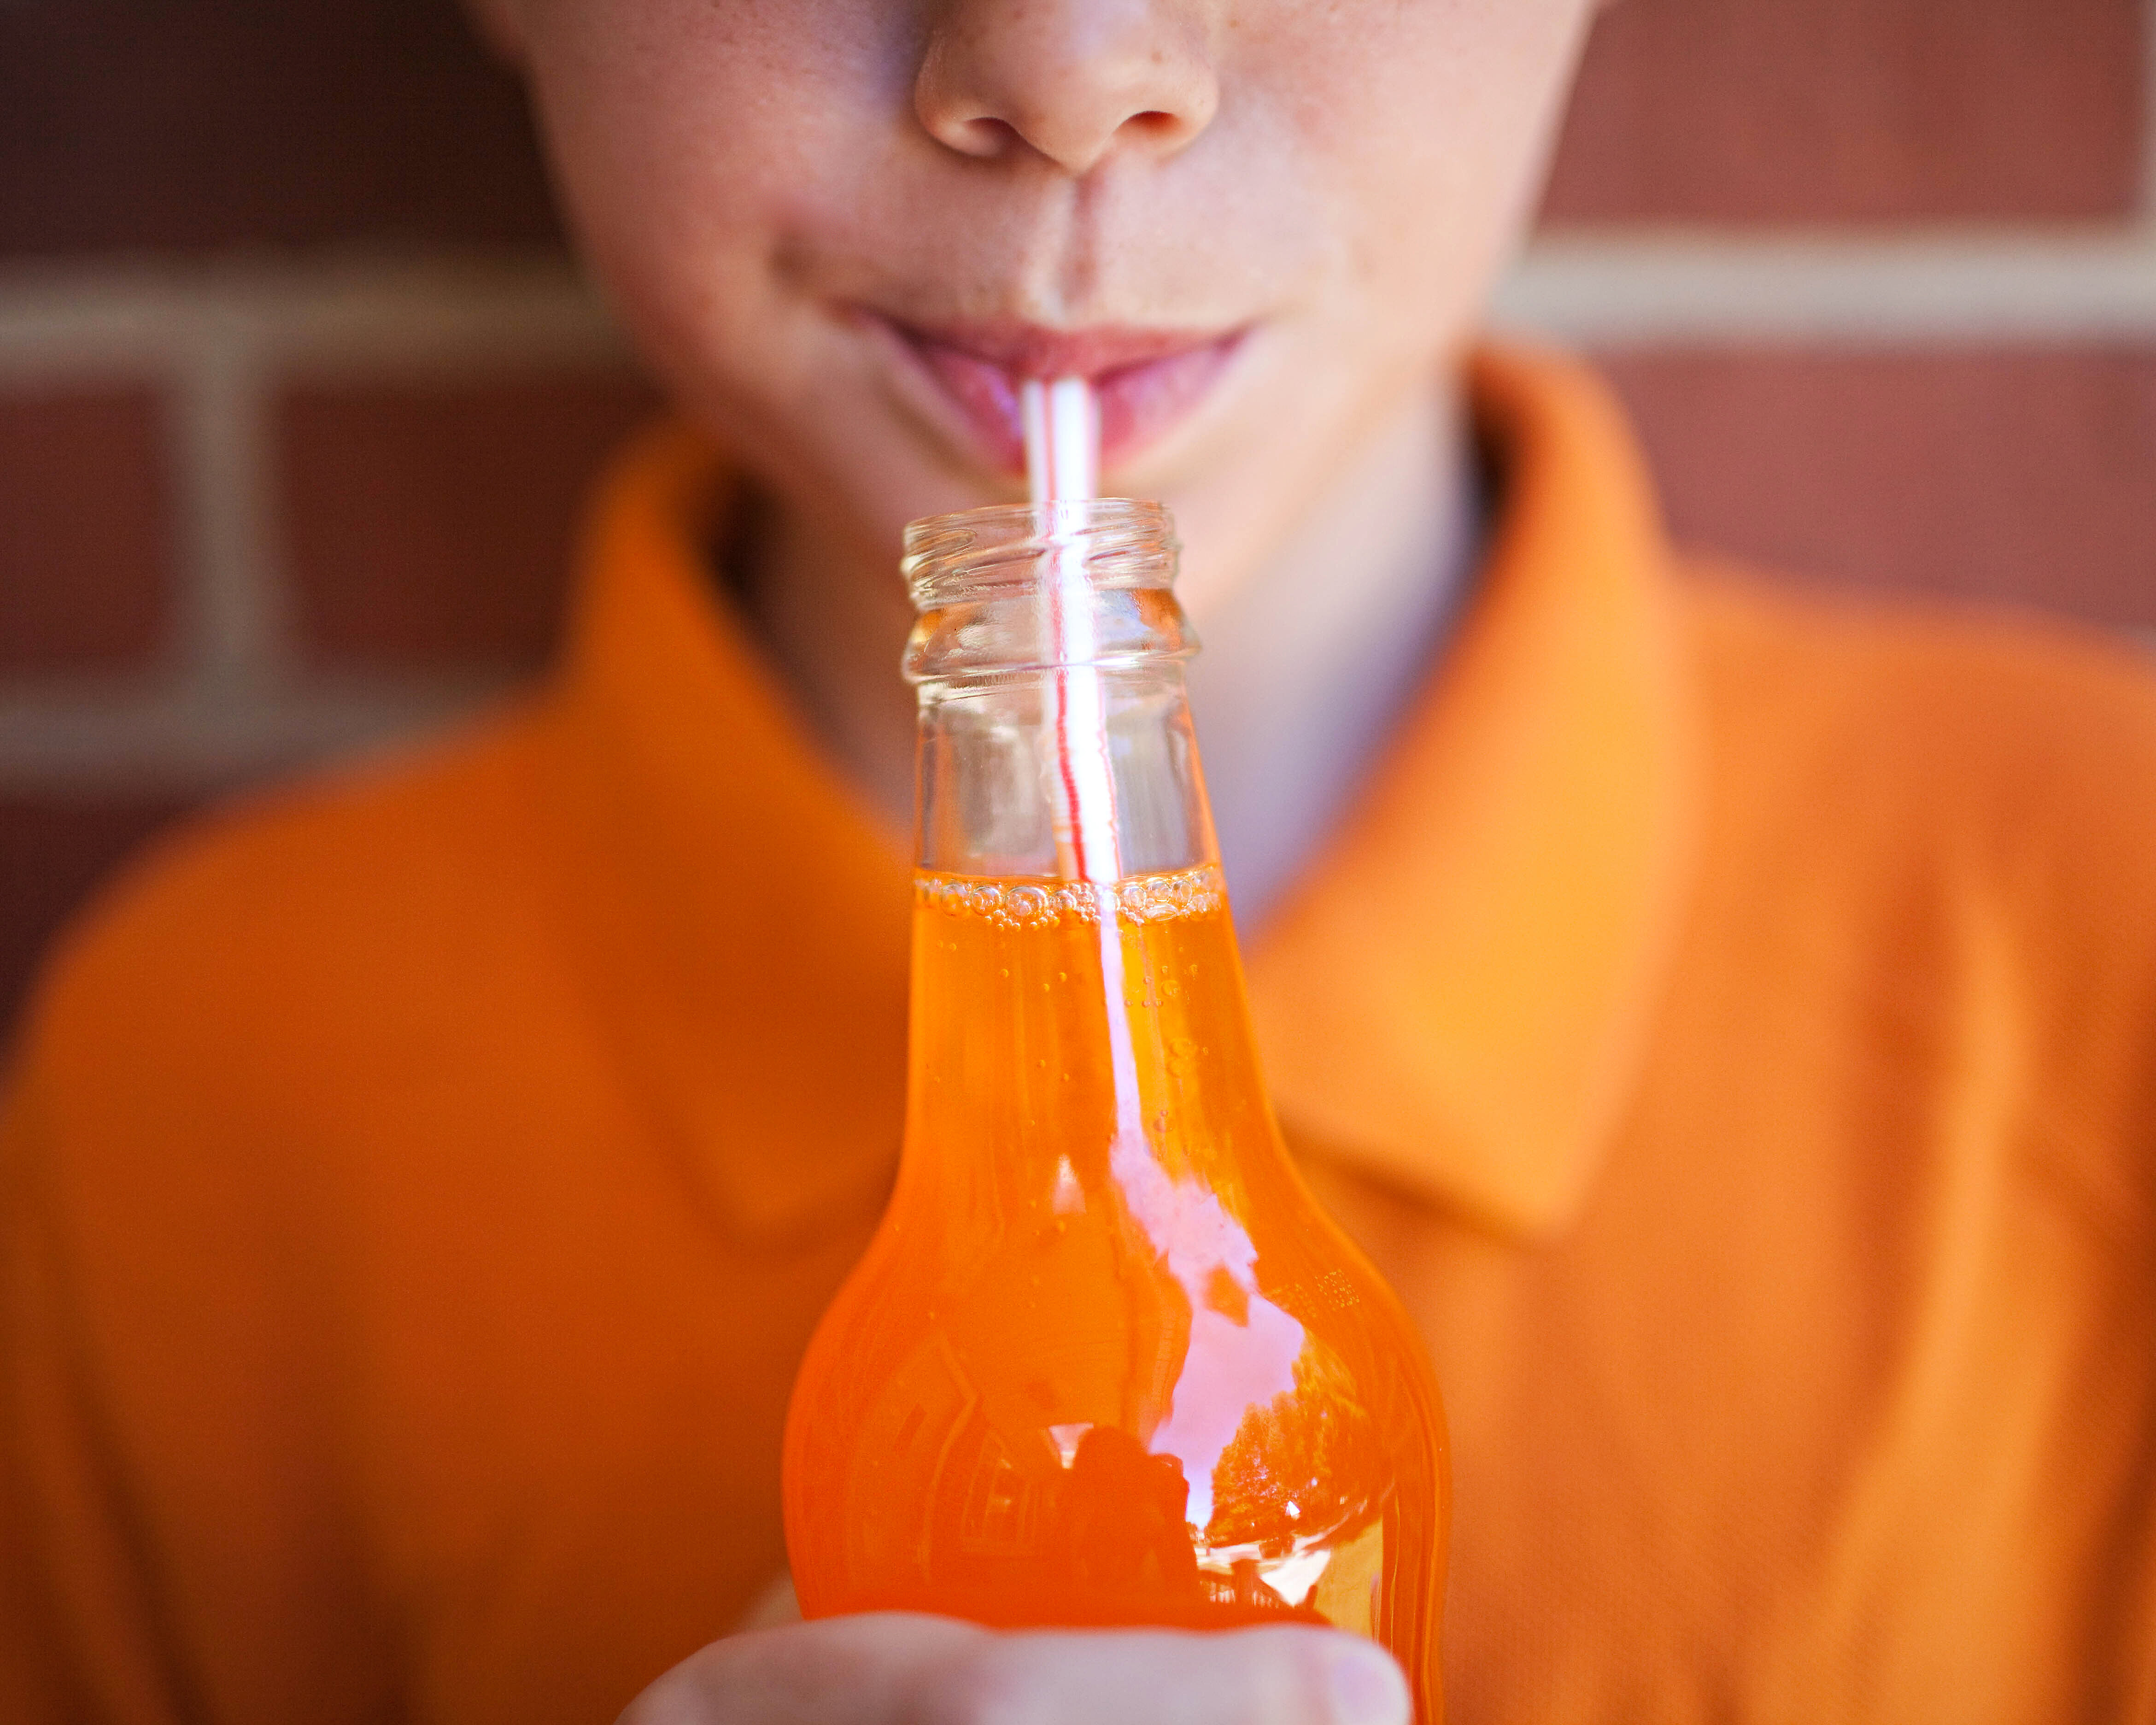 Person sipping a beverage from a glass bottle using a straw